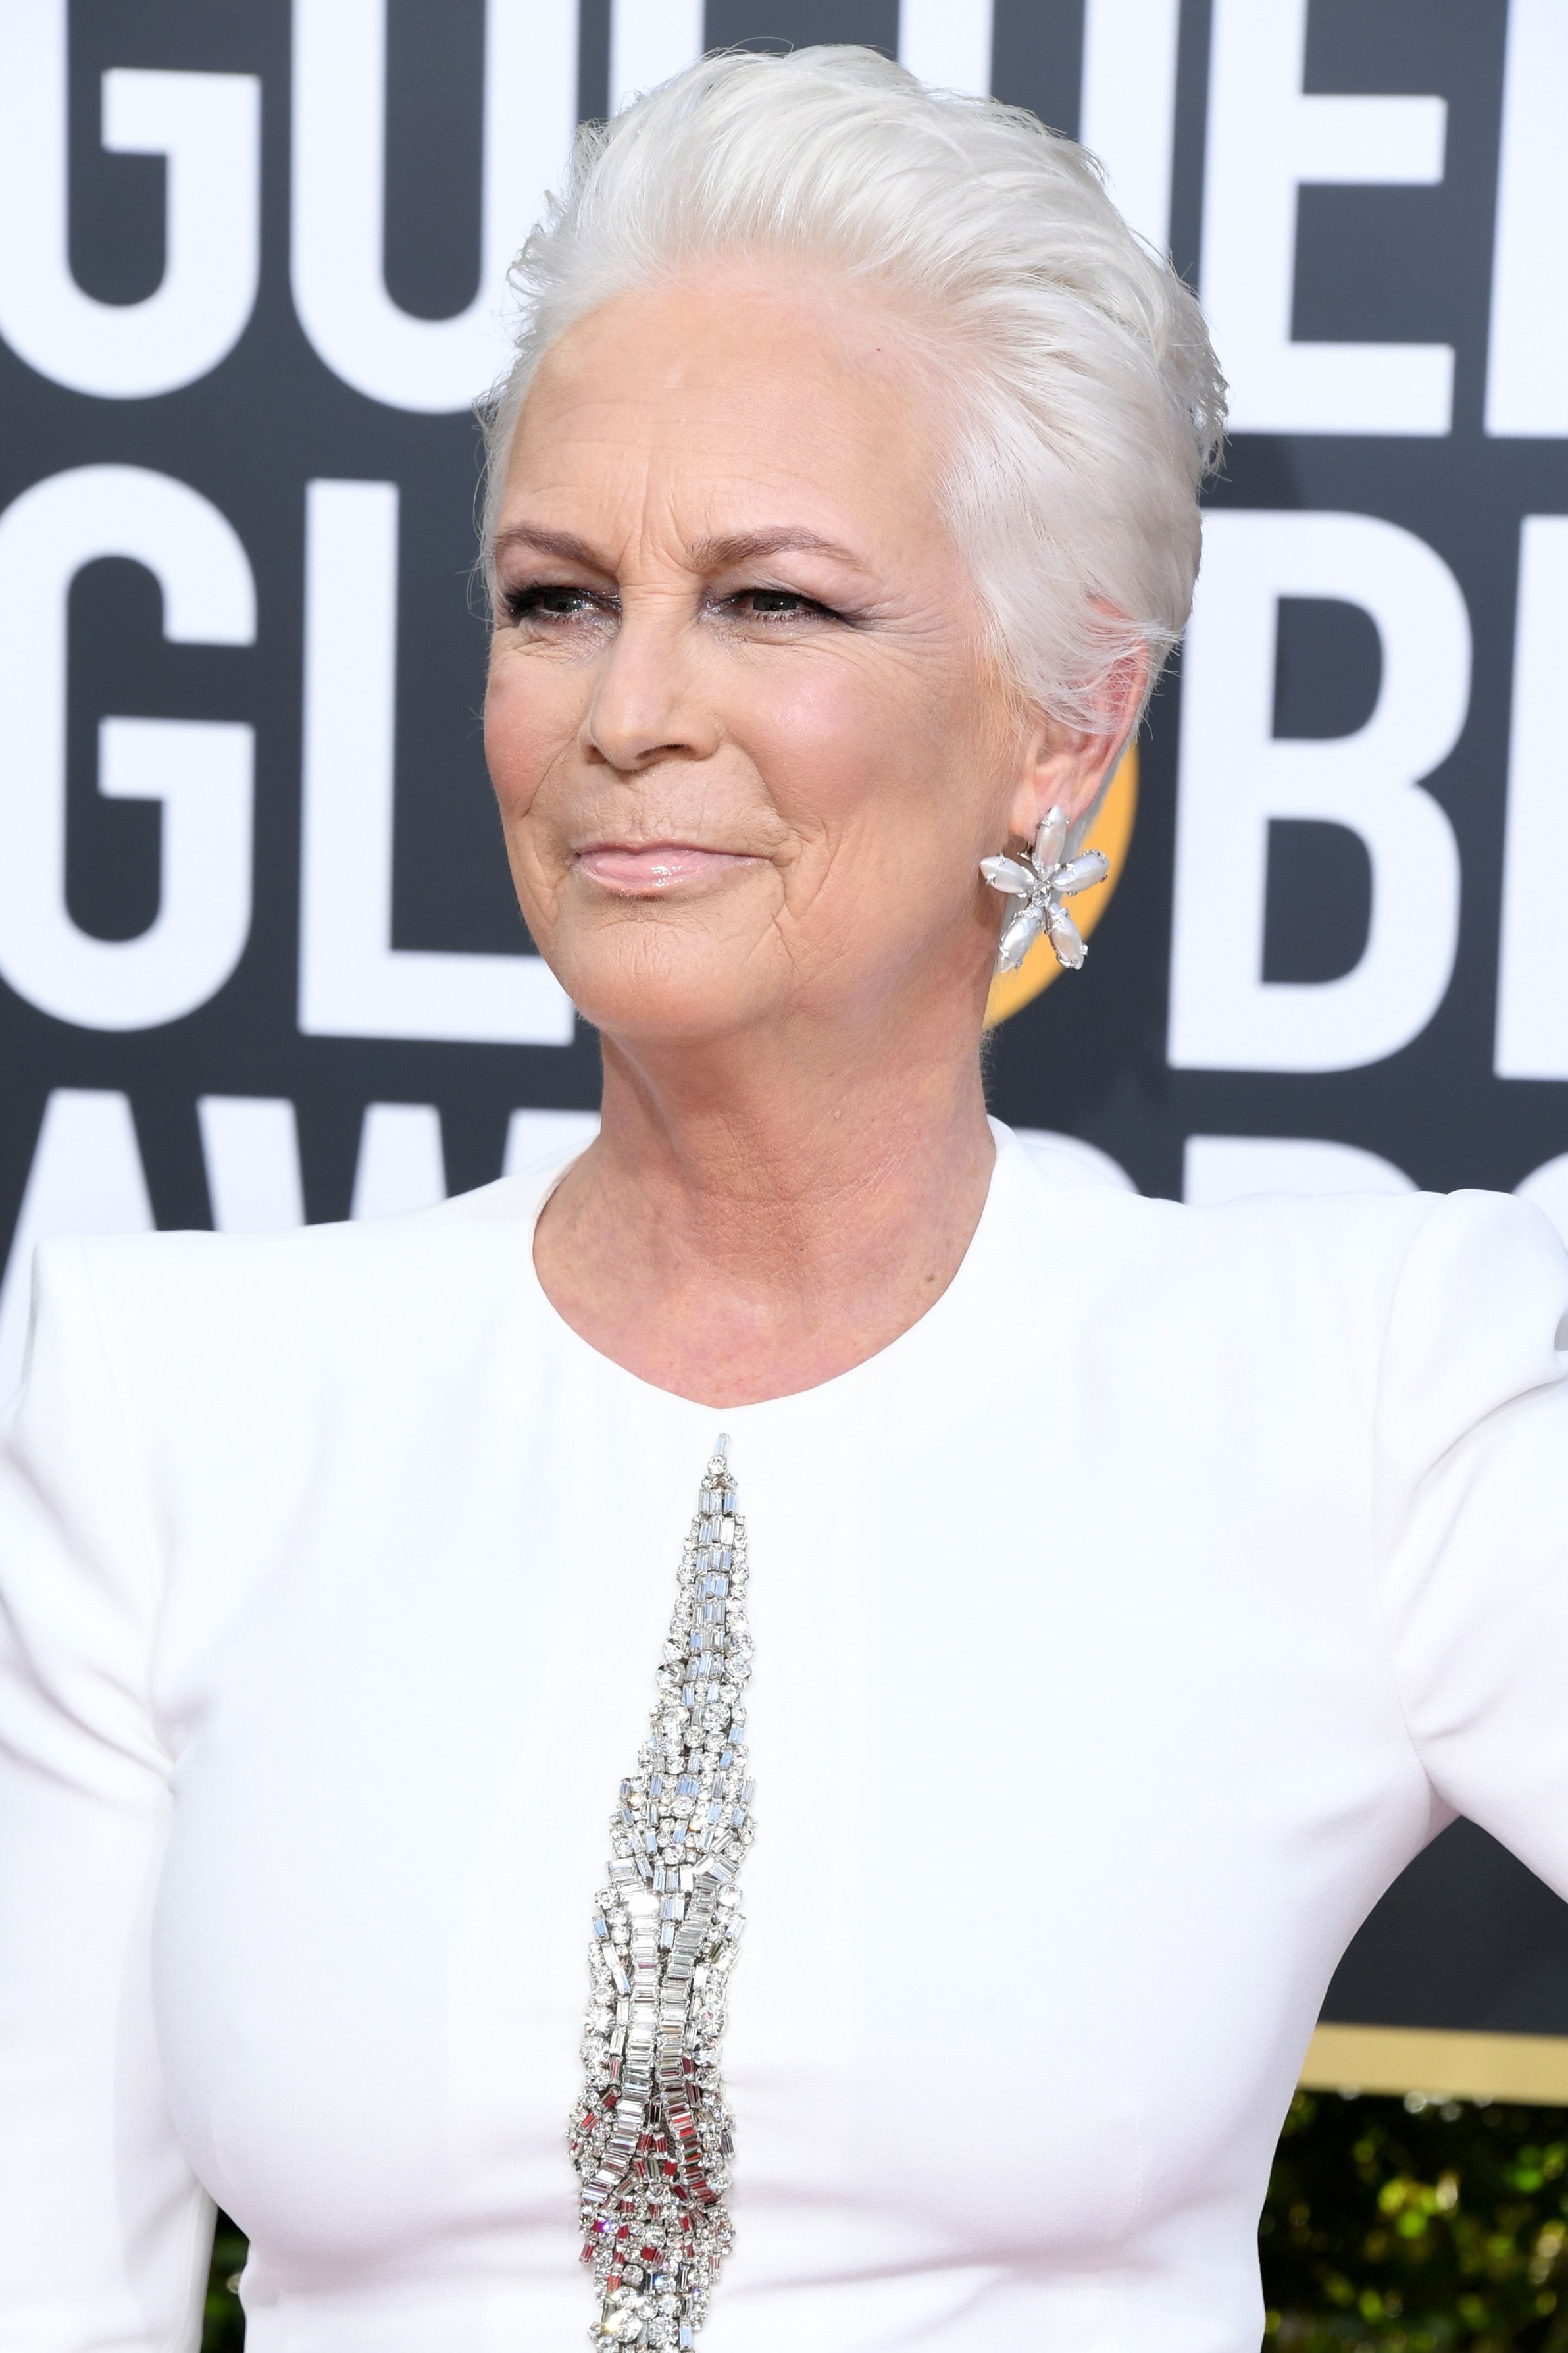  Jamie Lee Curtis at the Golden Globe Awards at The Beverly Hilton Hotel on January 6, 2019 | Getty Images 